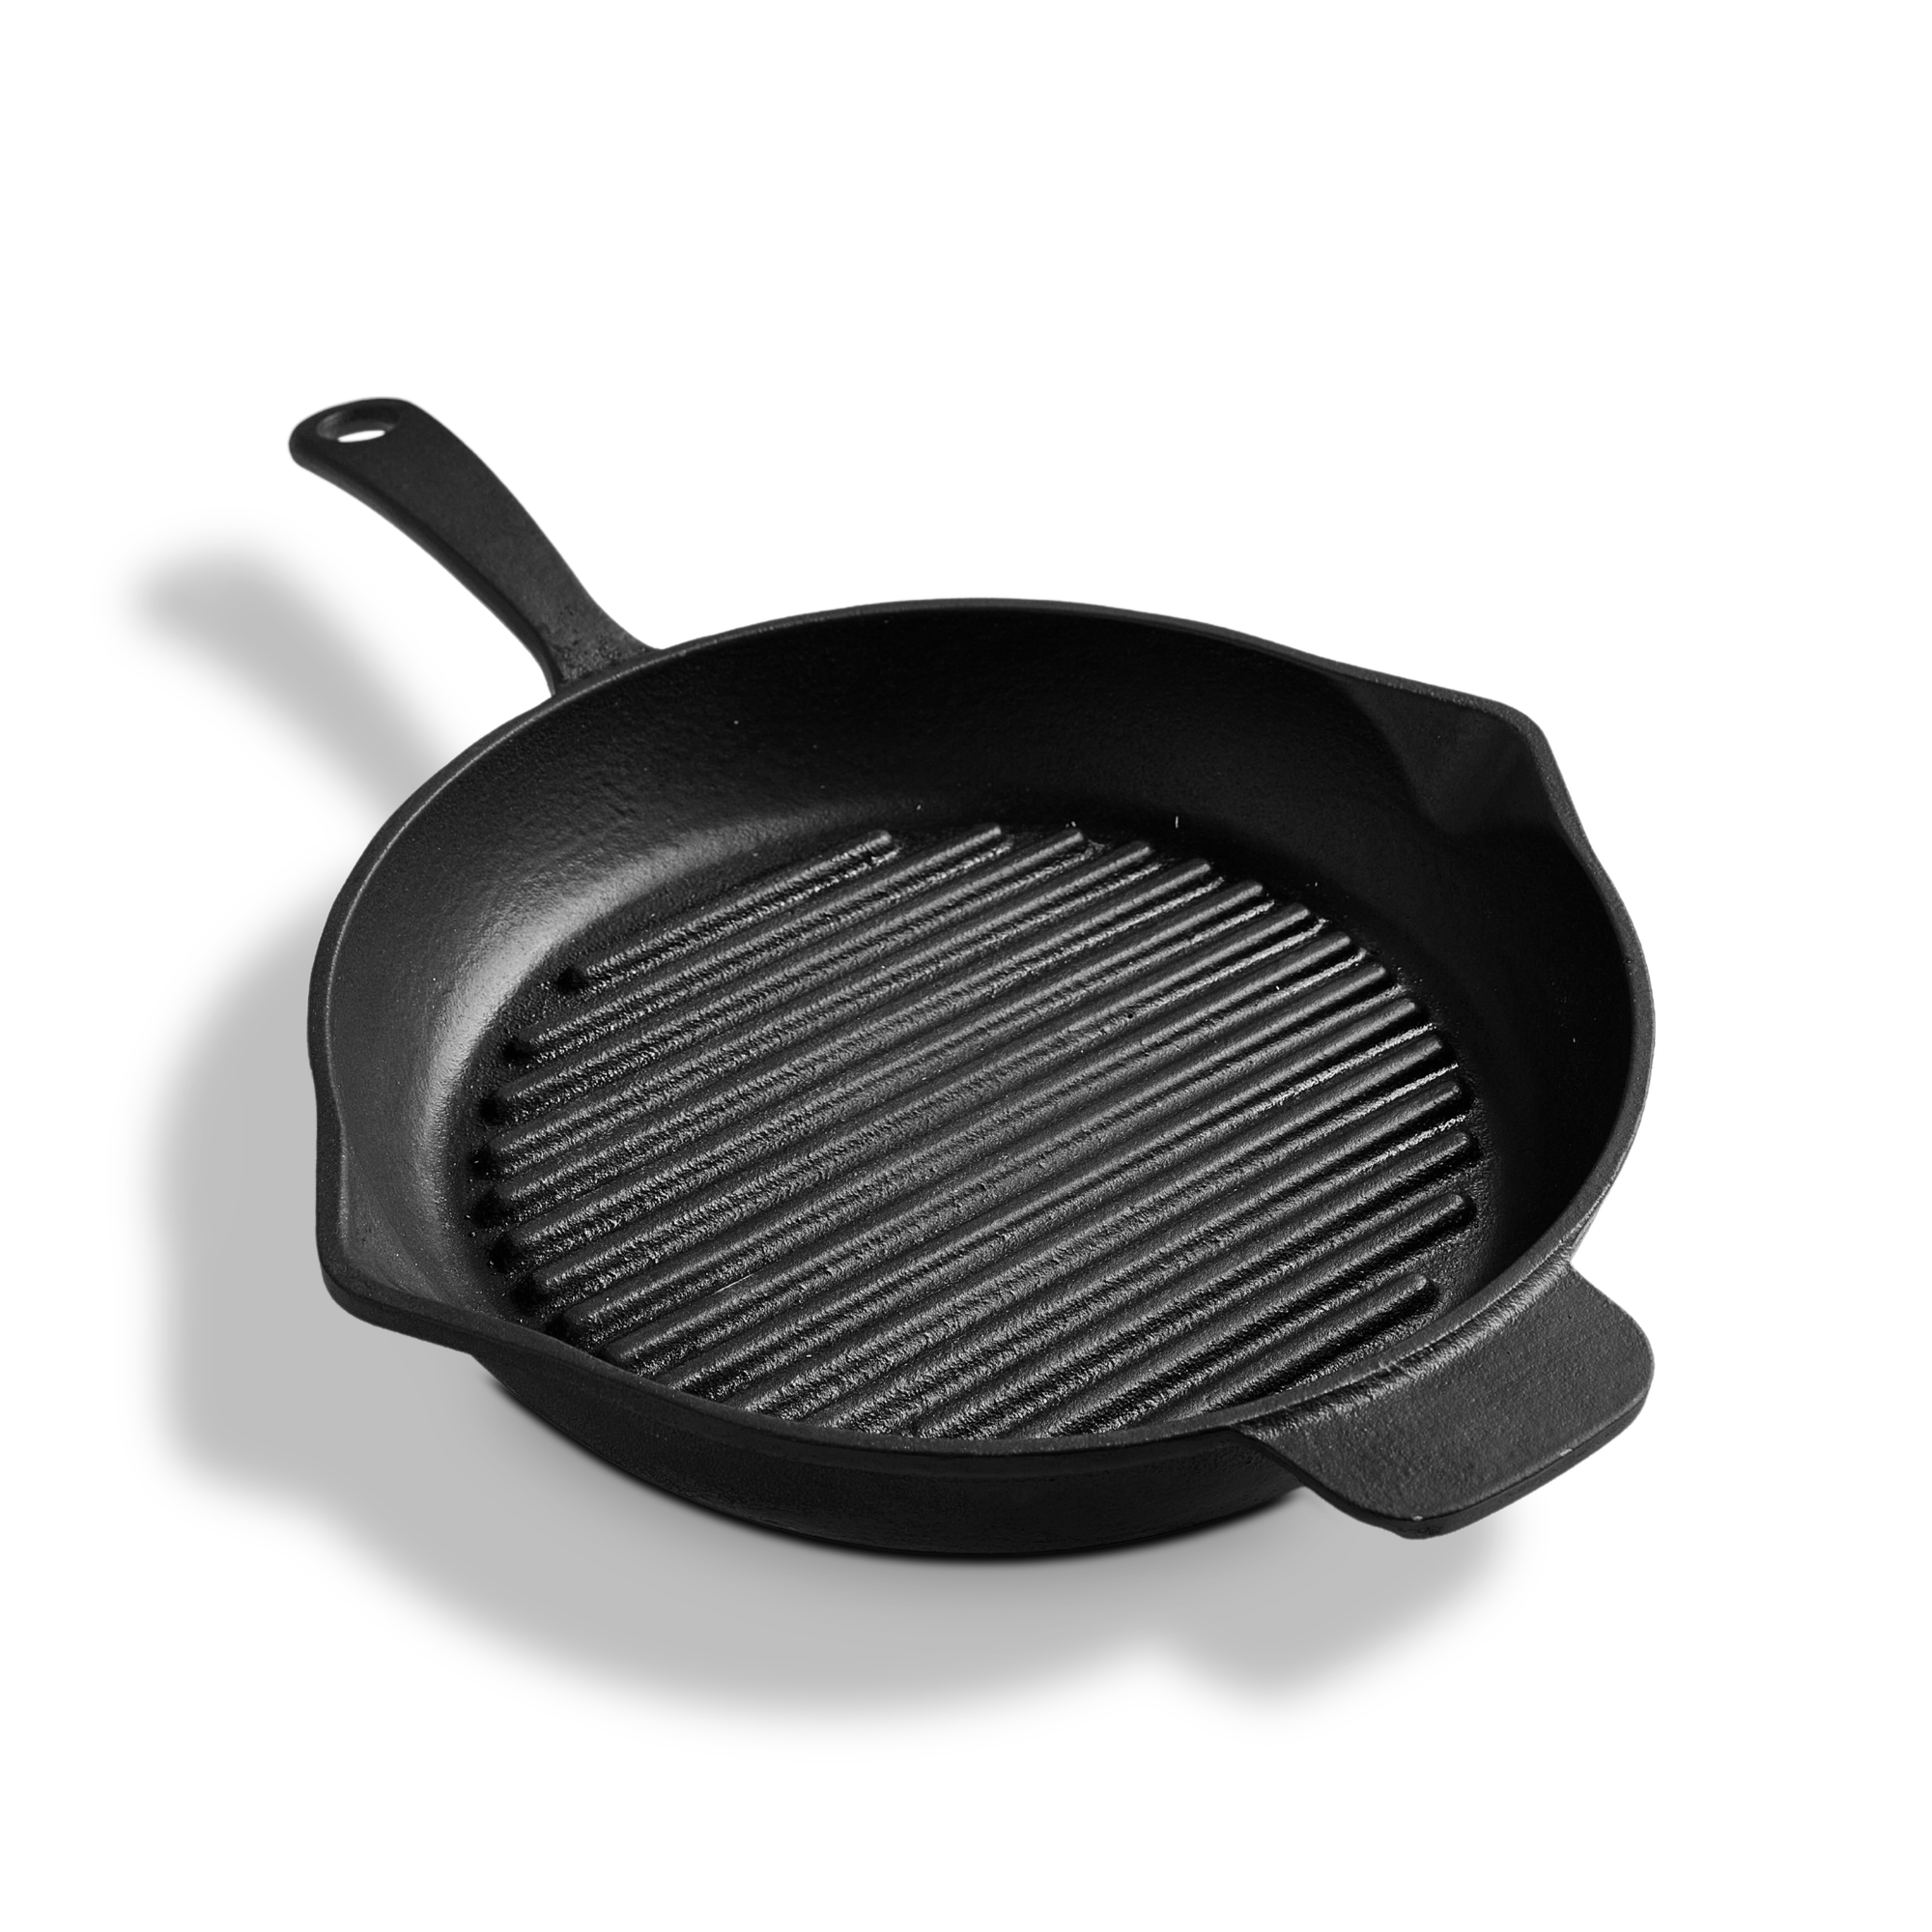 Iron Frying & Grill Pans for sale